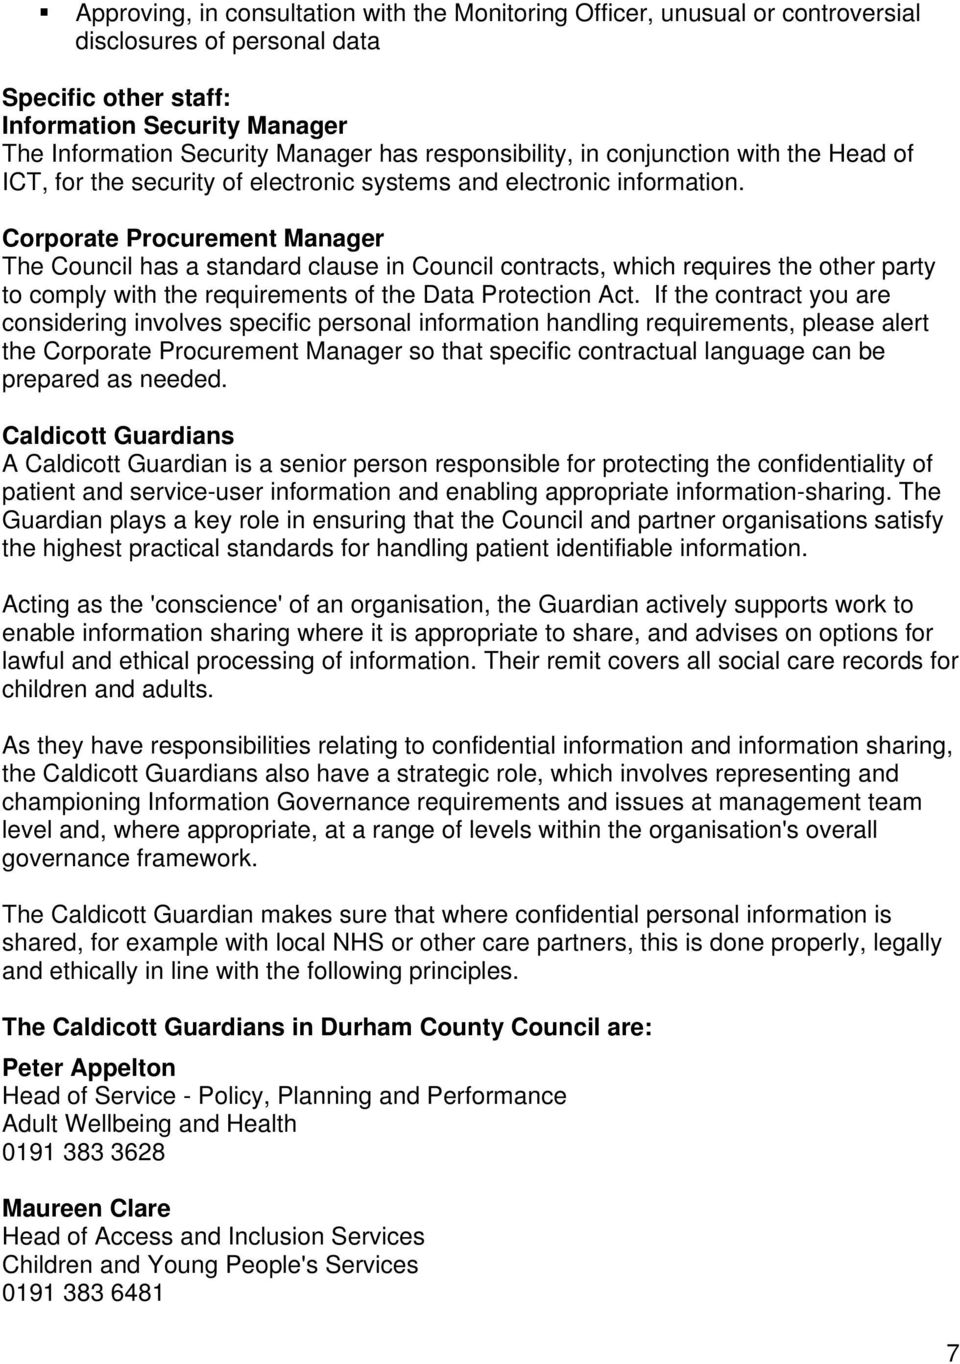 Corporate Procurement Manager The Council has a standard clause in Council contracts, which requires the other party to comply with the requirements of the Data Protection Act.